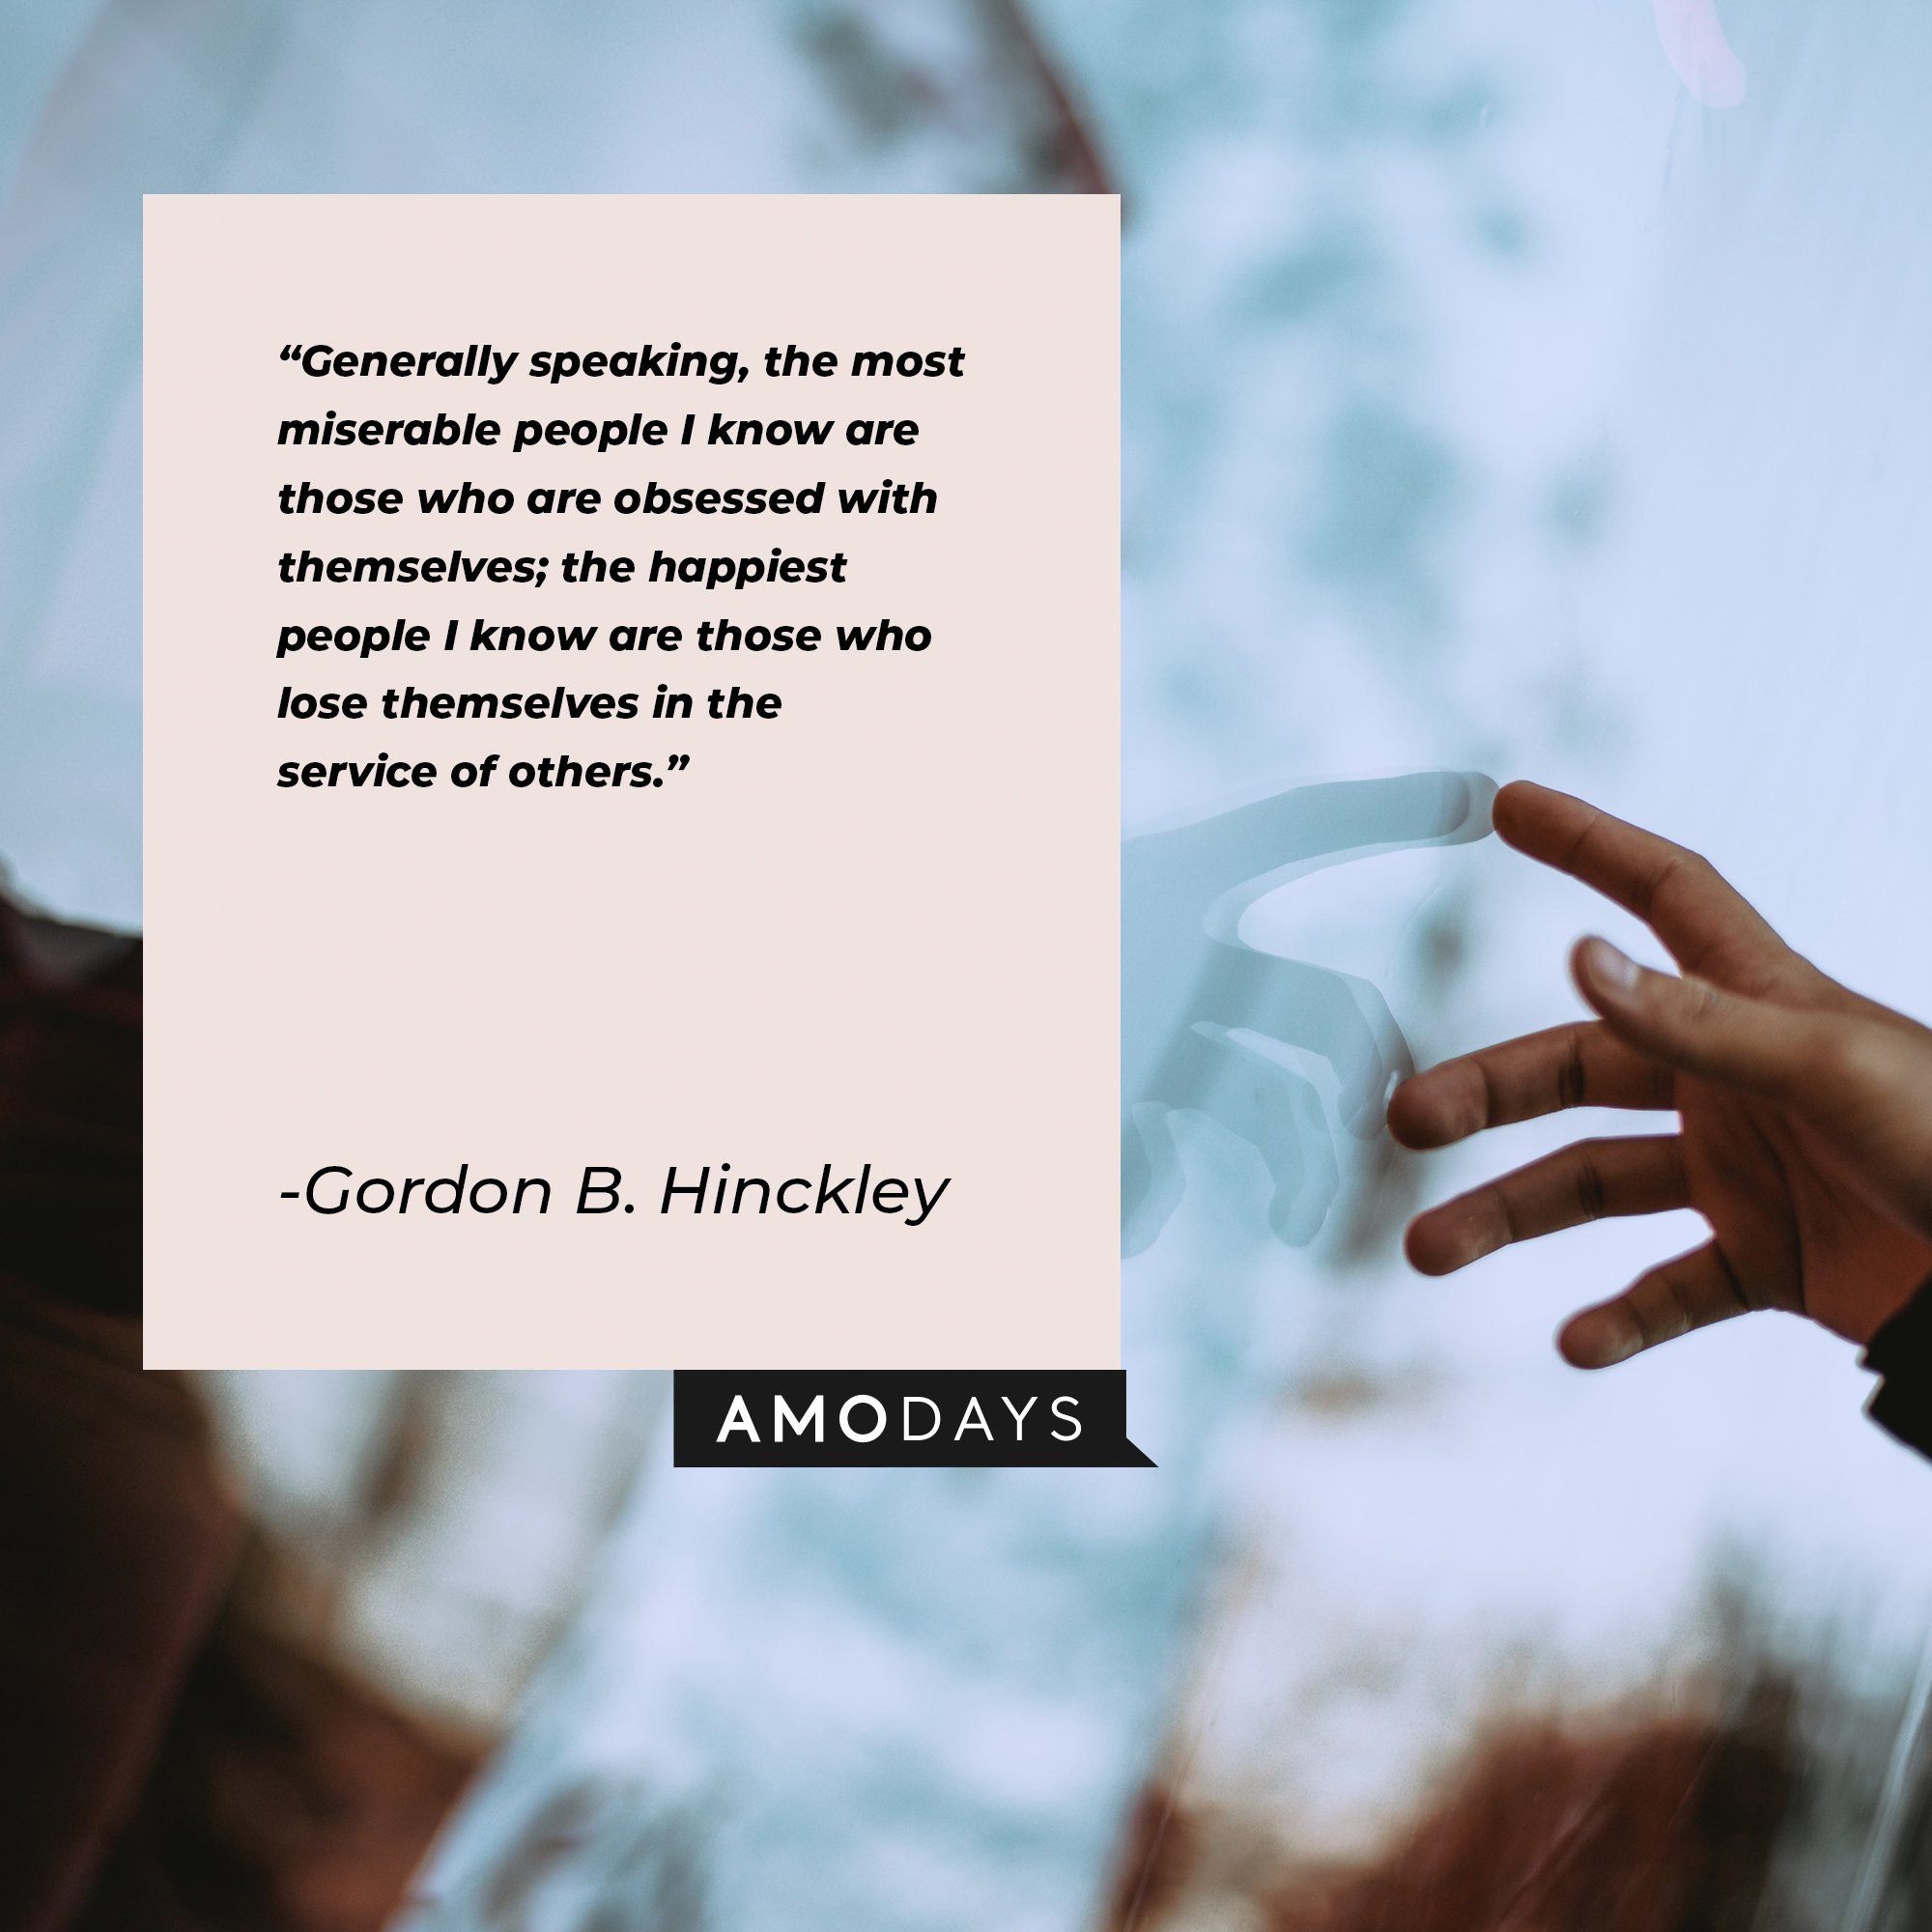   Gordon B. Hinckley’s quote: "Generally speaking, the most miserable people I know are those who are obsessed with themselves; the happiest people I know are those who lose themselves in the service of others." | Image: AmoDays